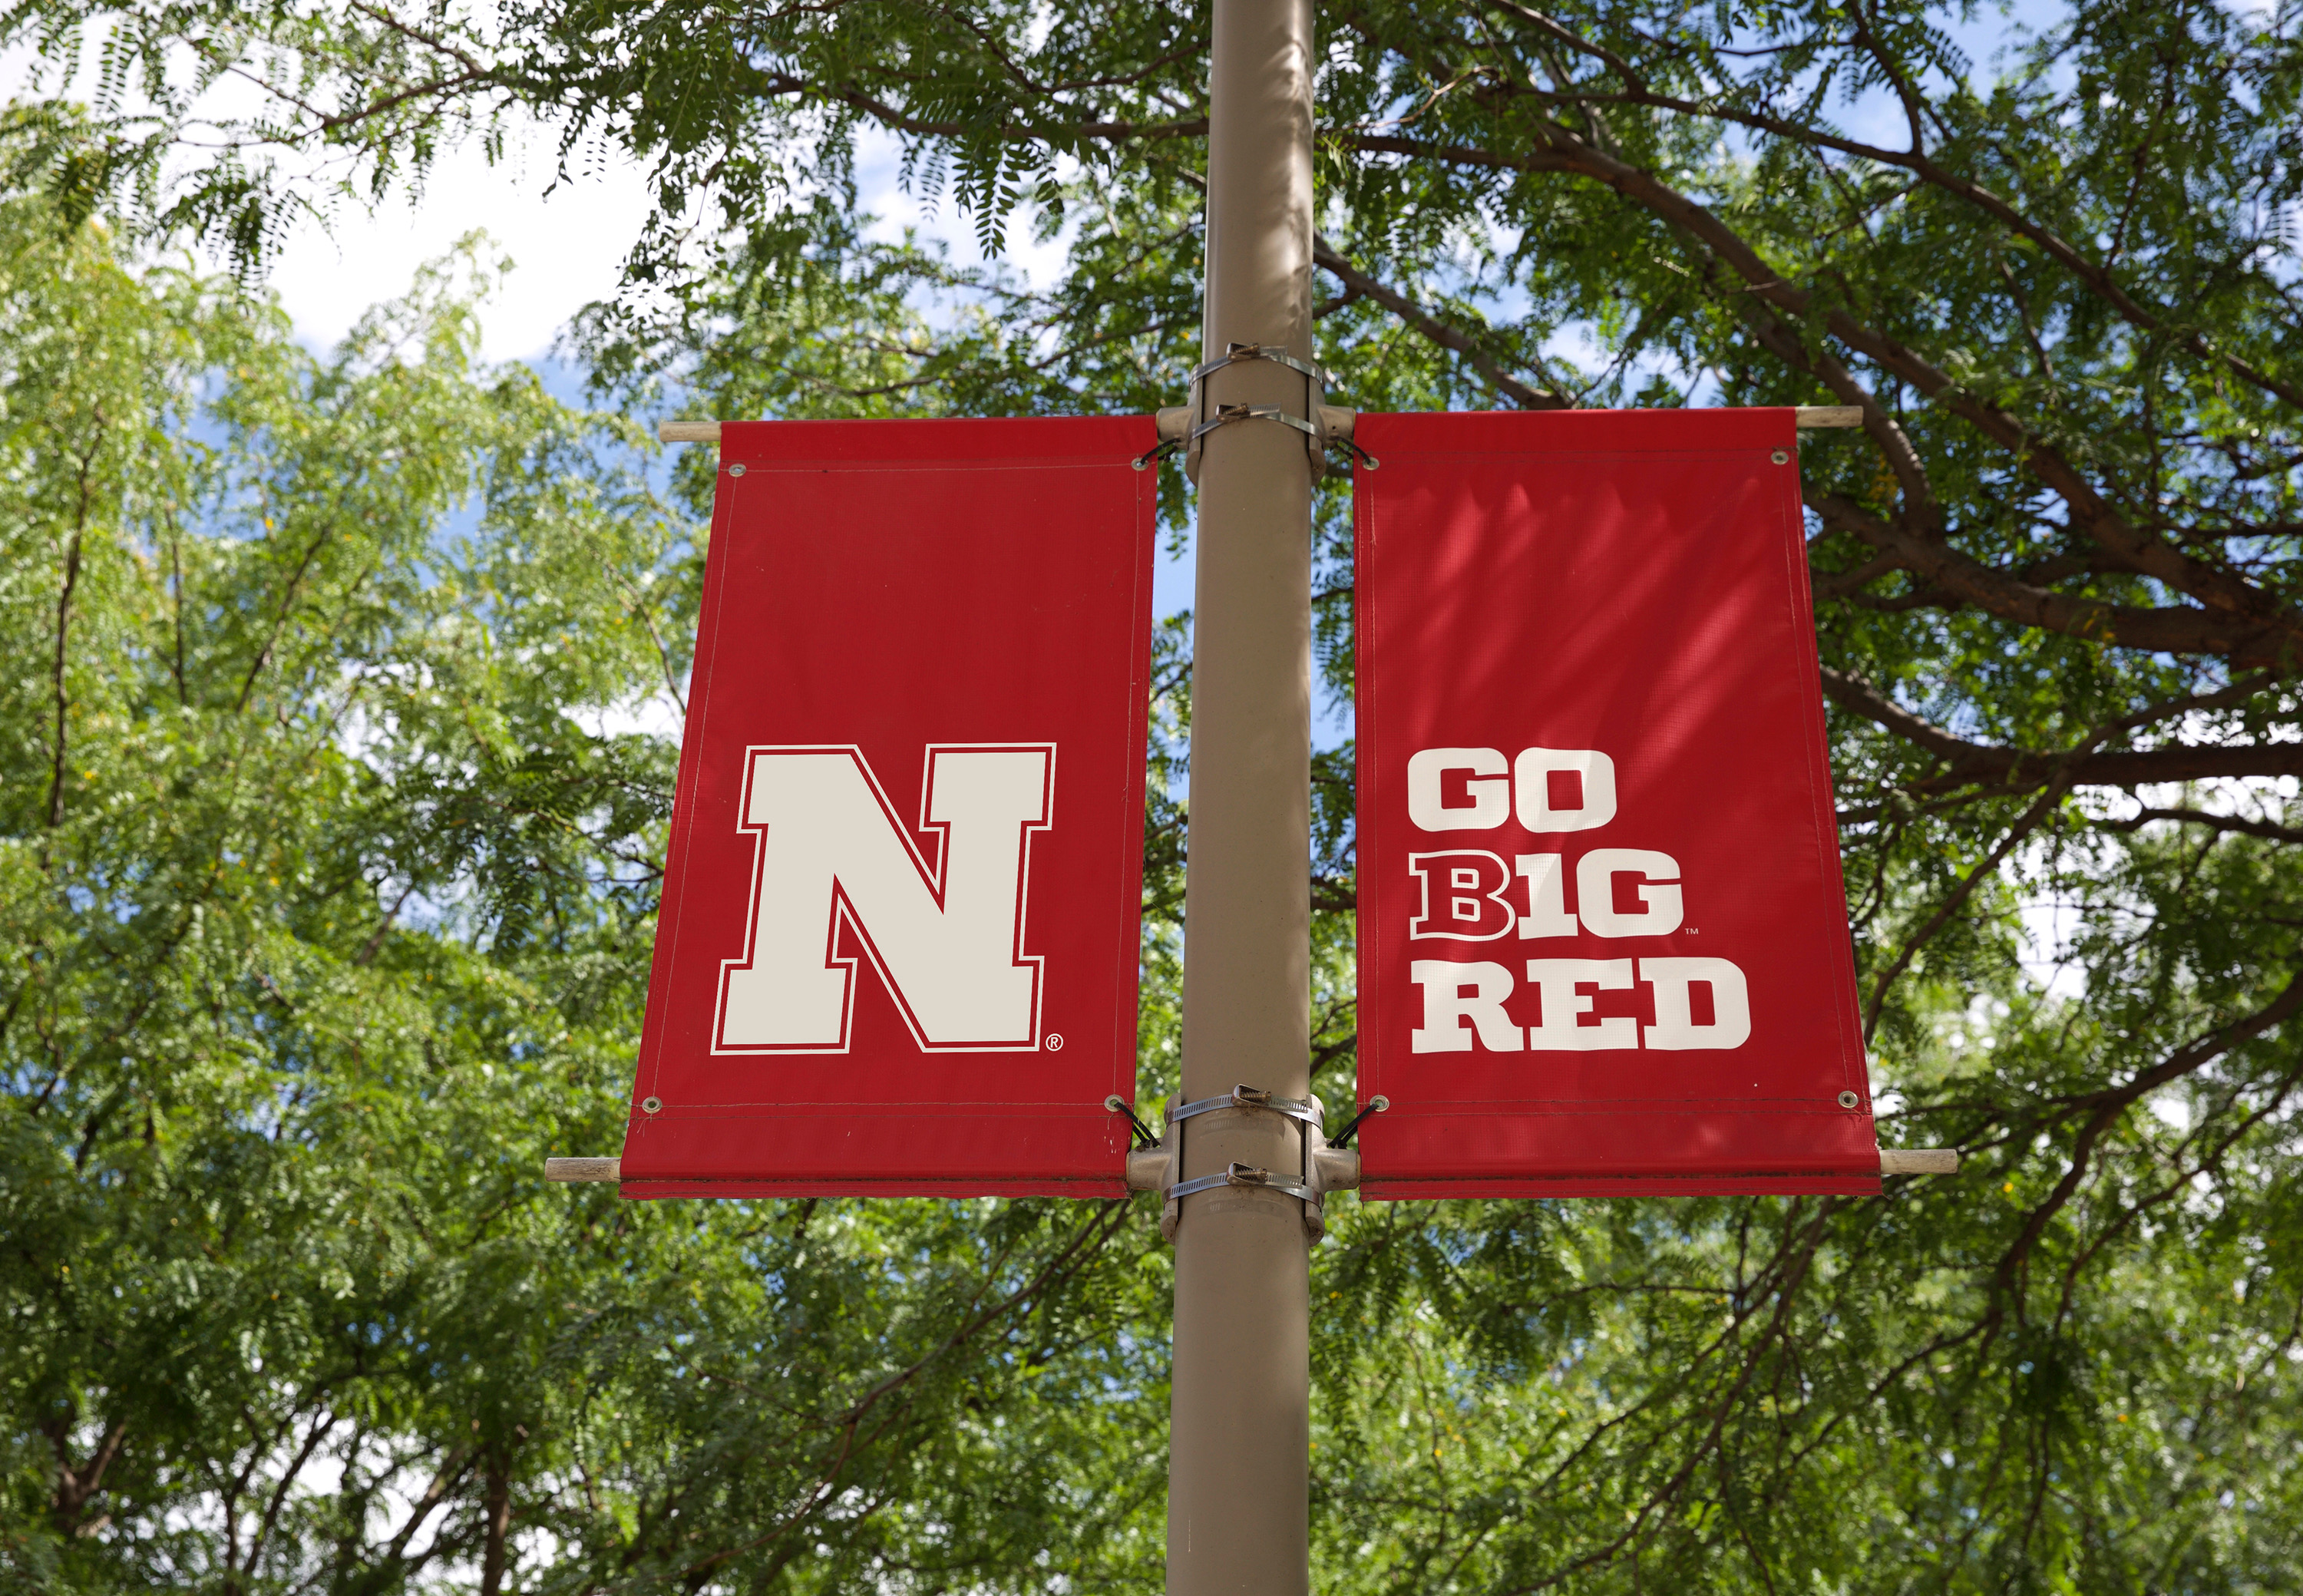 Please review the draft document and submit opinions, suggestions or comments to Student Conduct & Community Standards at studentconduct@unl.edu by Monday, April 23.